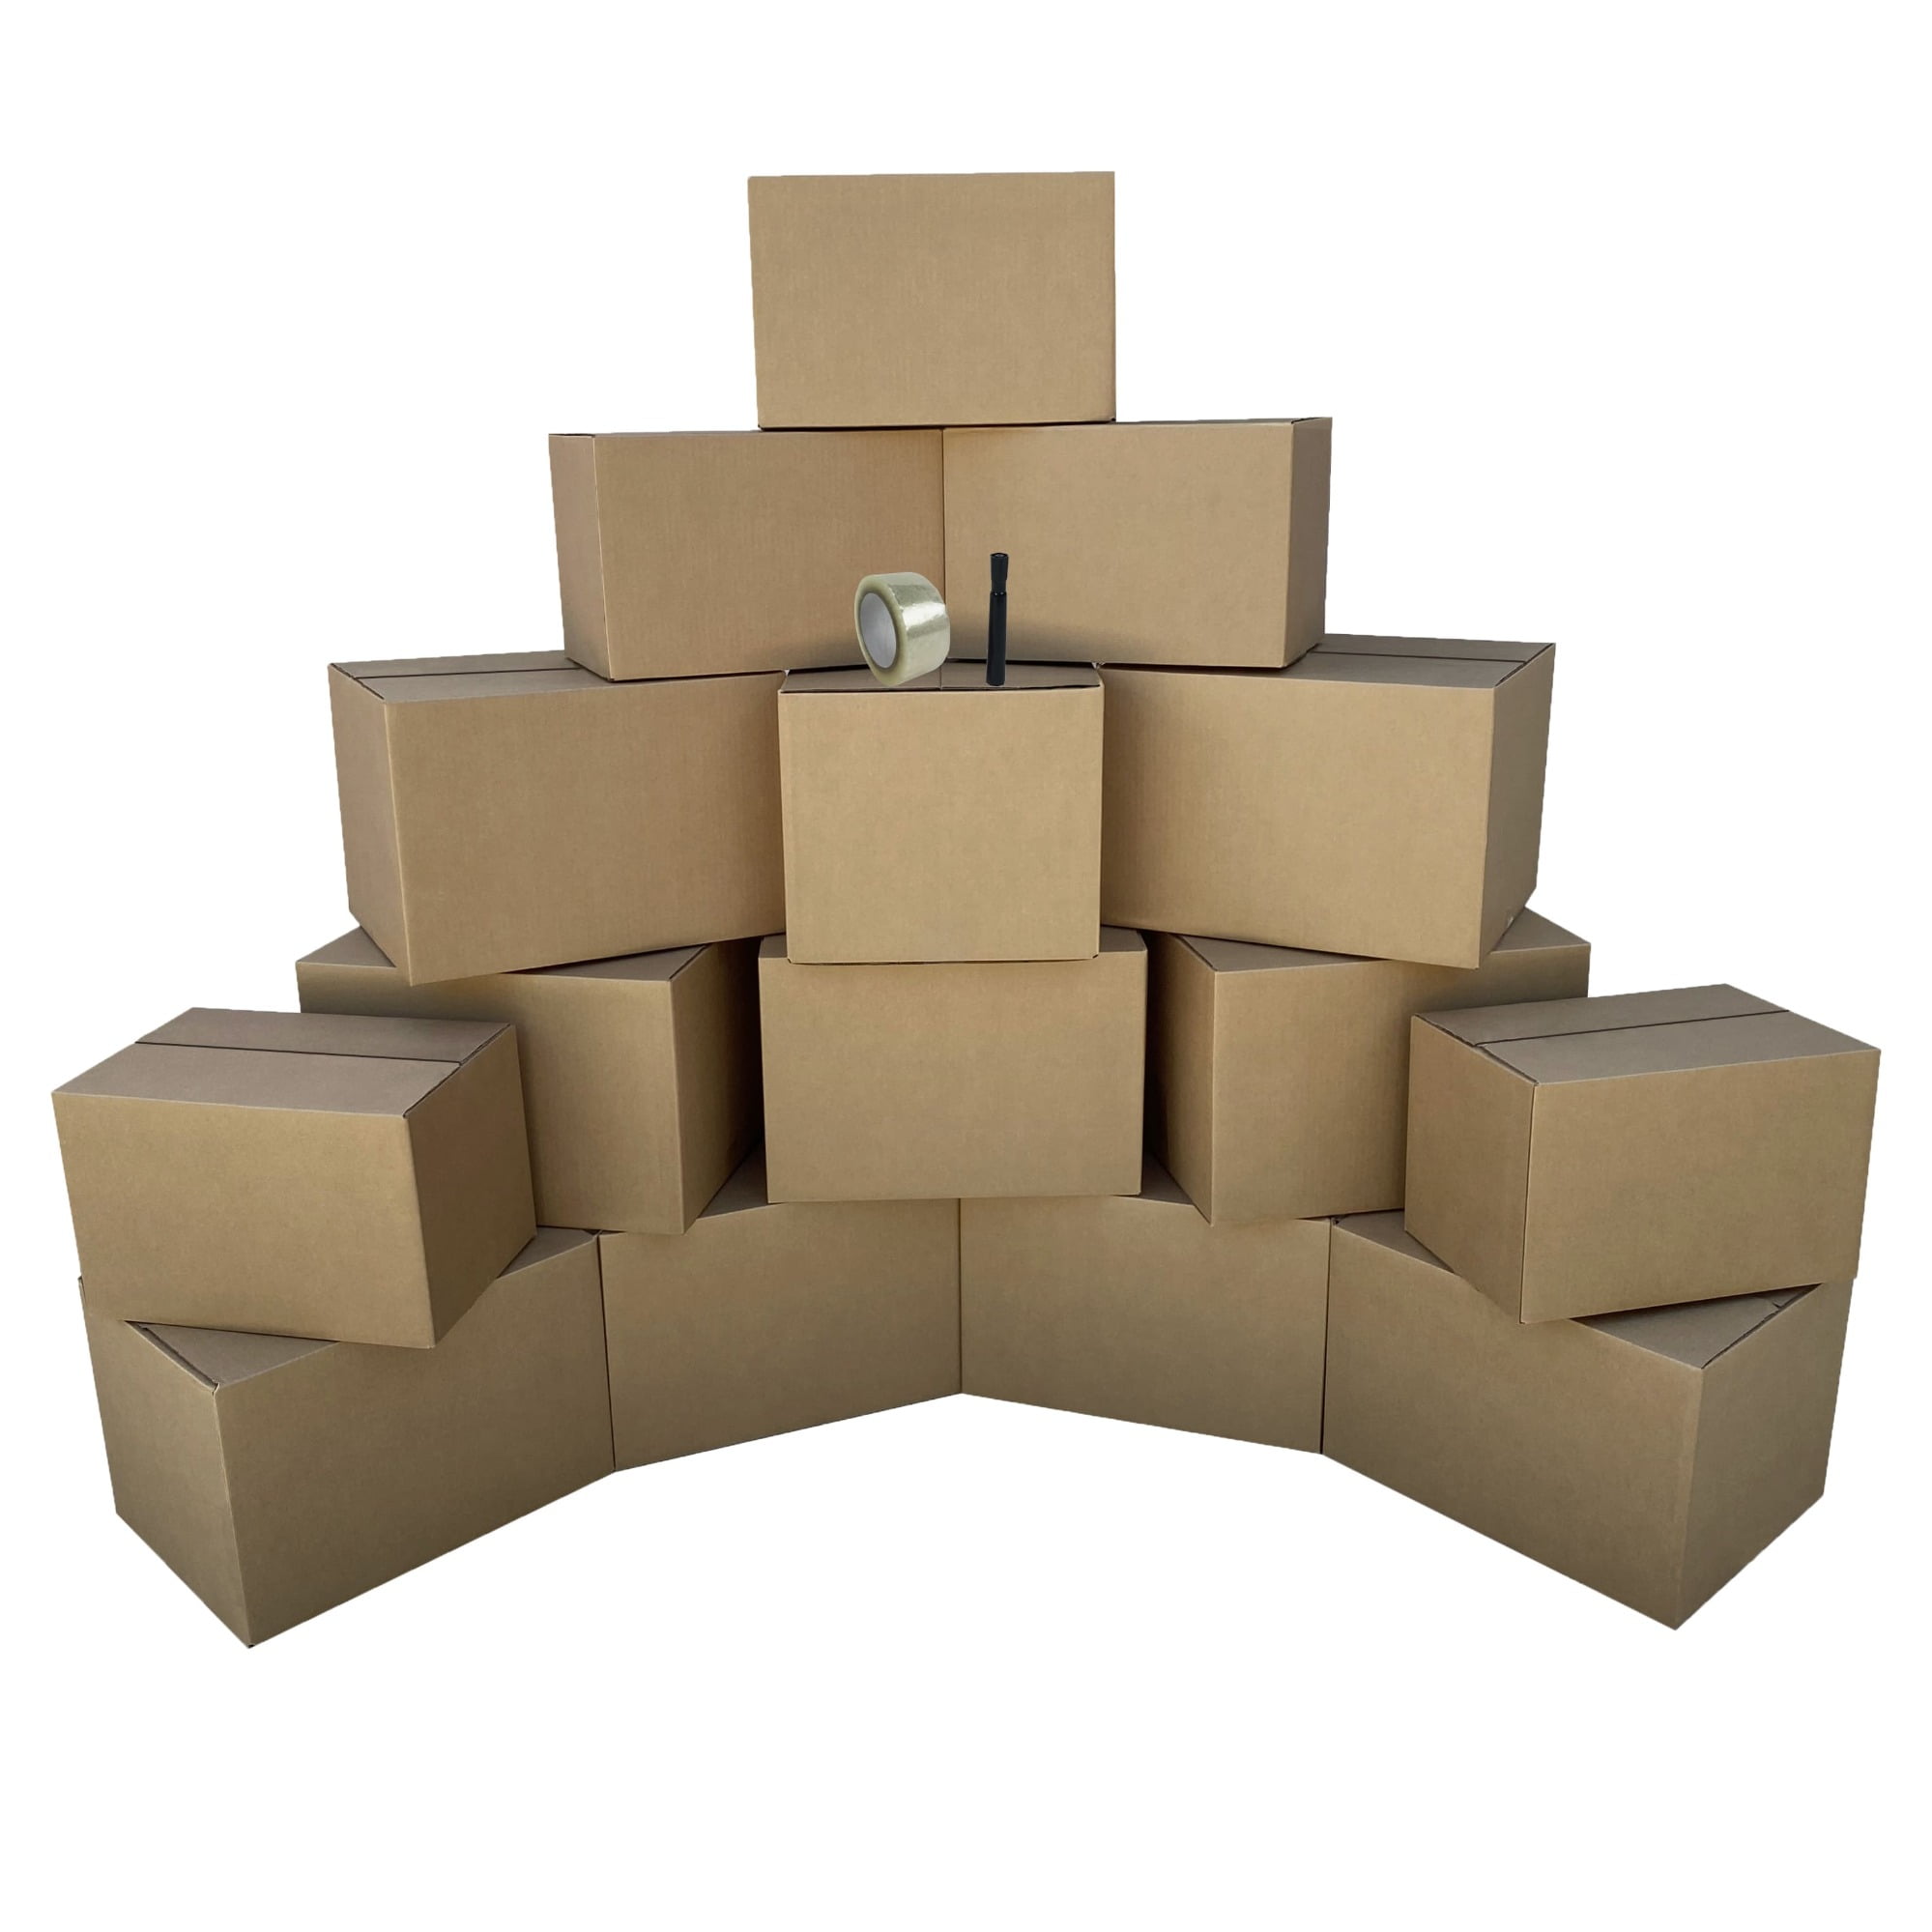 INCLUDING DOUBLE WALL PRO #1 HOUSE REMOVAL PACKING KIT 40 CARDBOARD BOXES 